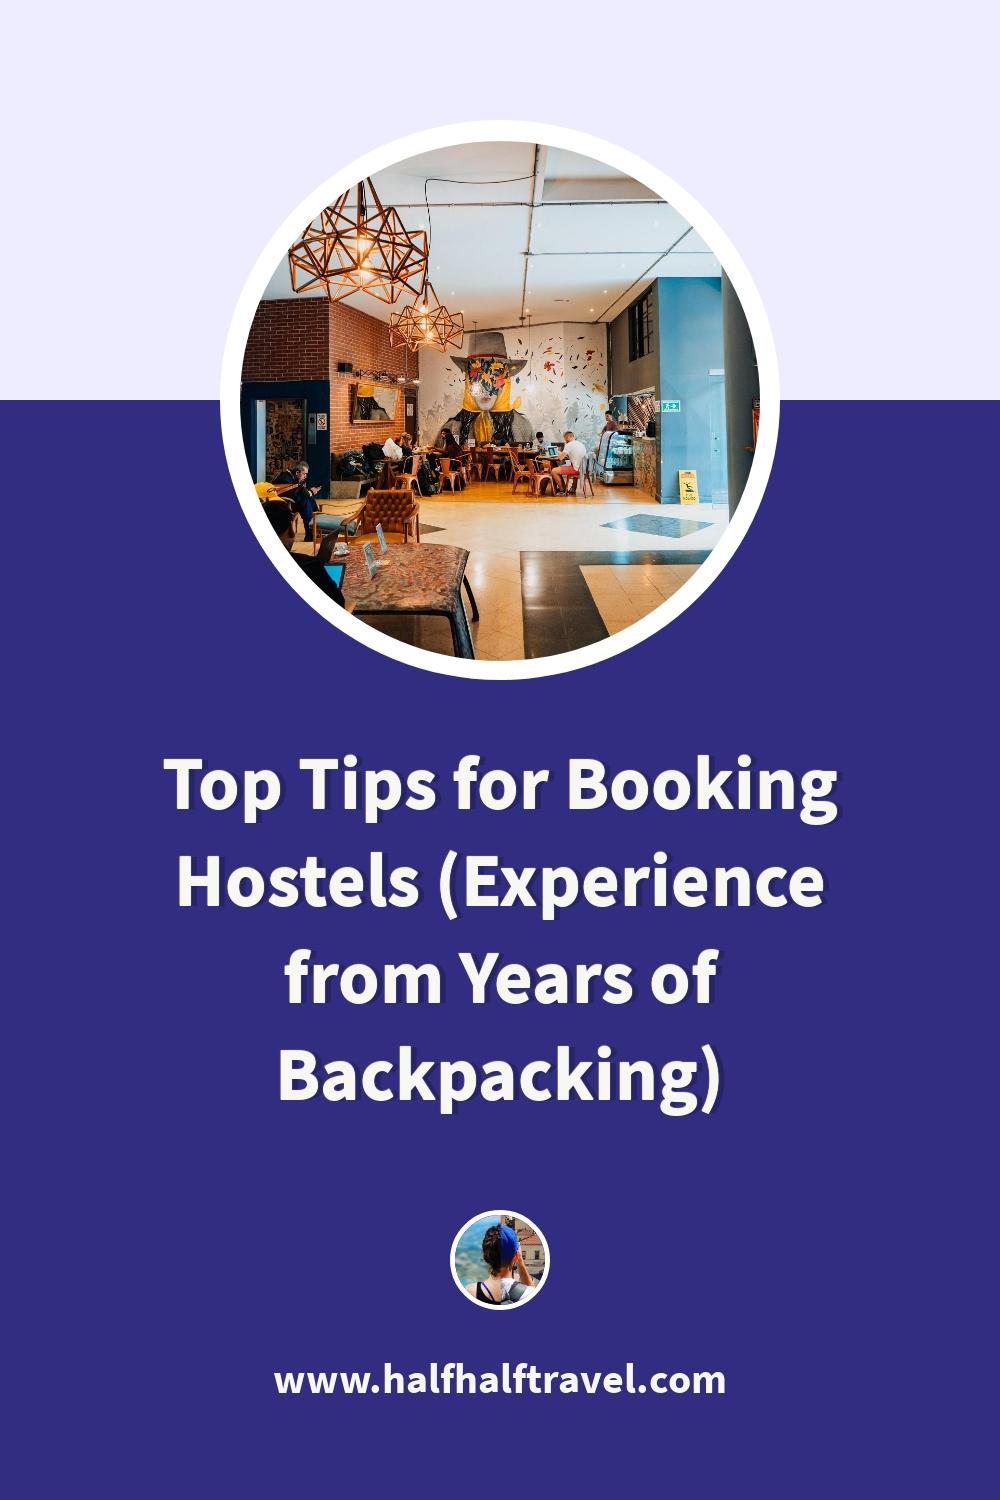 Pinterest image from the 'Top Tips for Booking Hostels (Experience from Years of Backpacking)' article on Half Half Travel